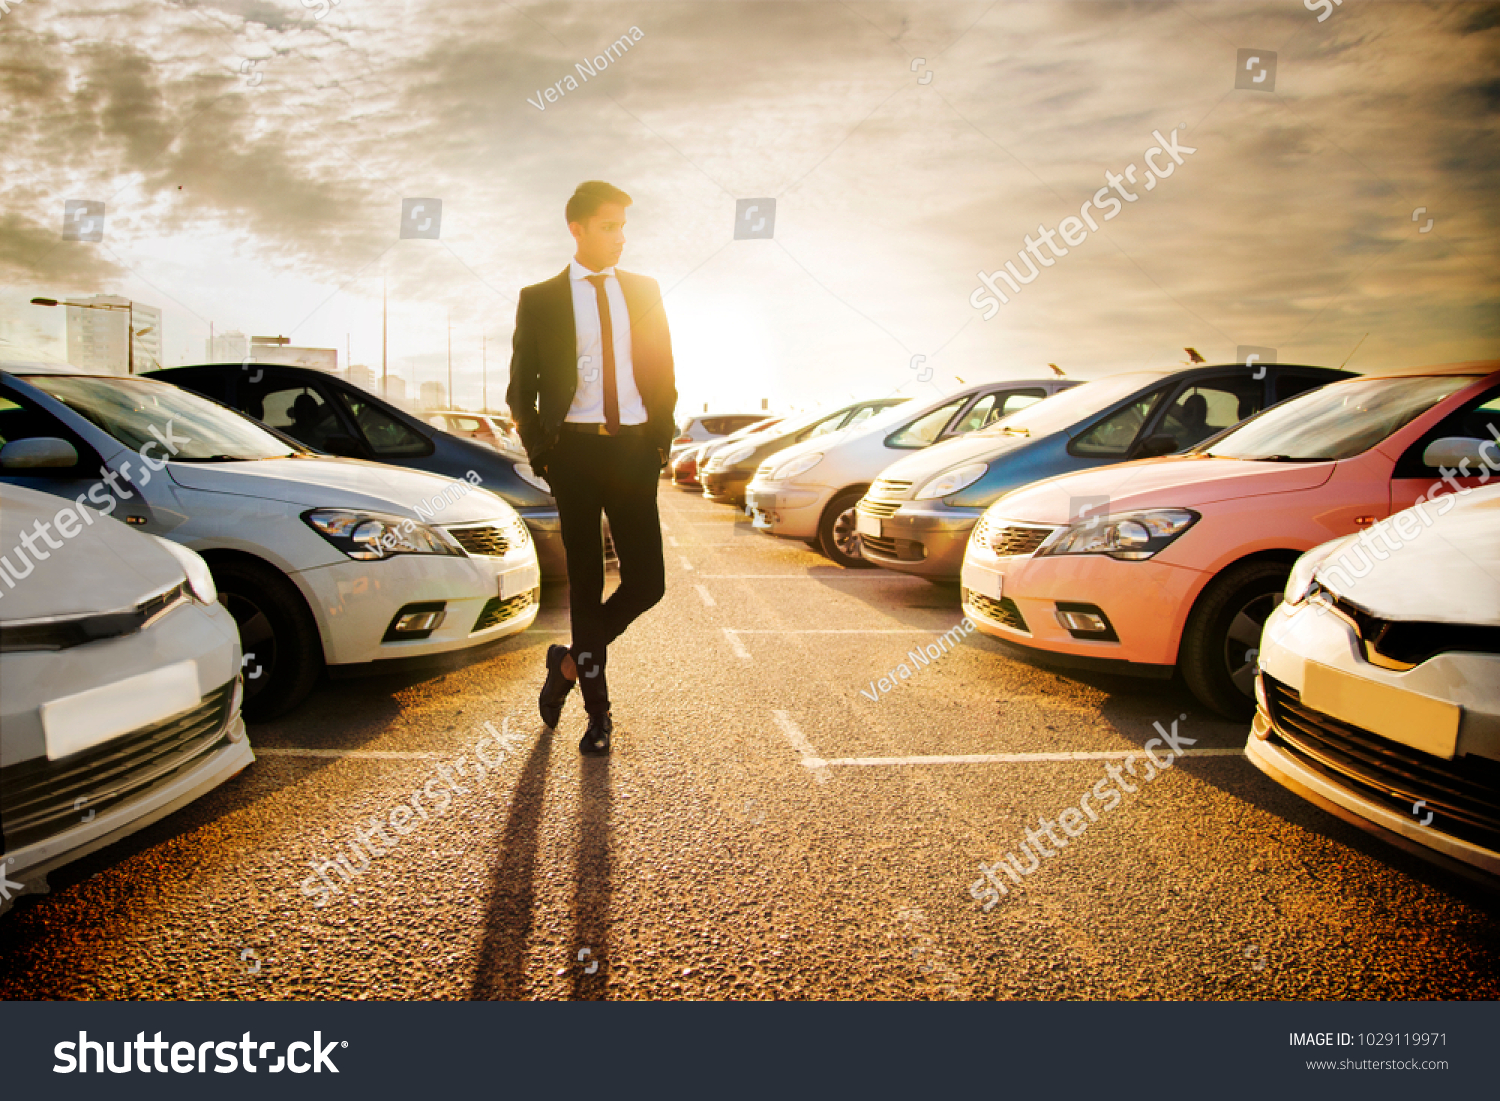 Handsome young man in a business suit choosing a car in the car market #1029119971